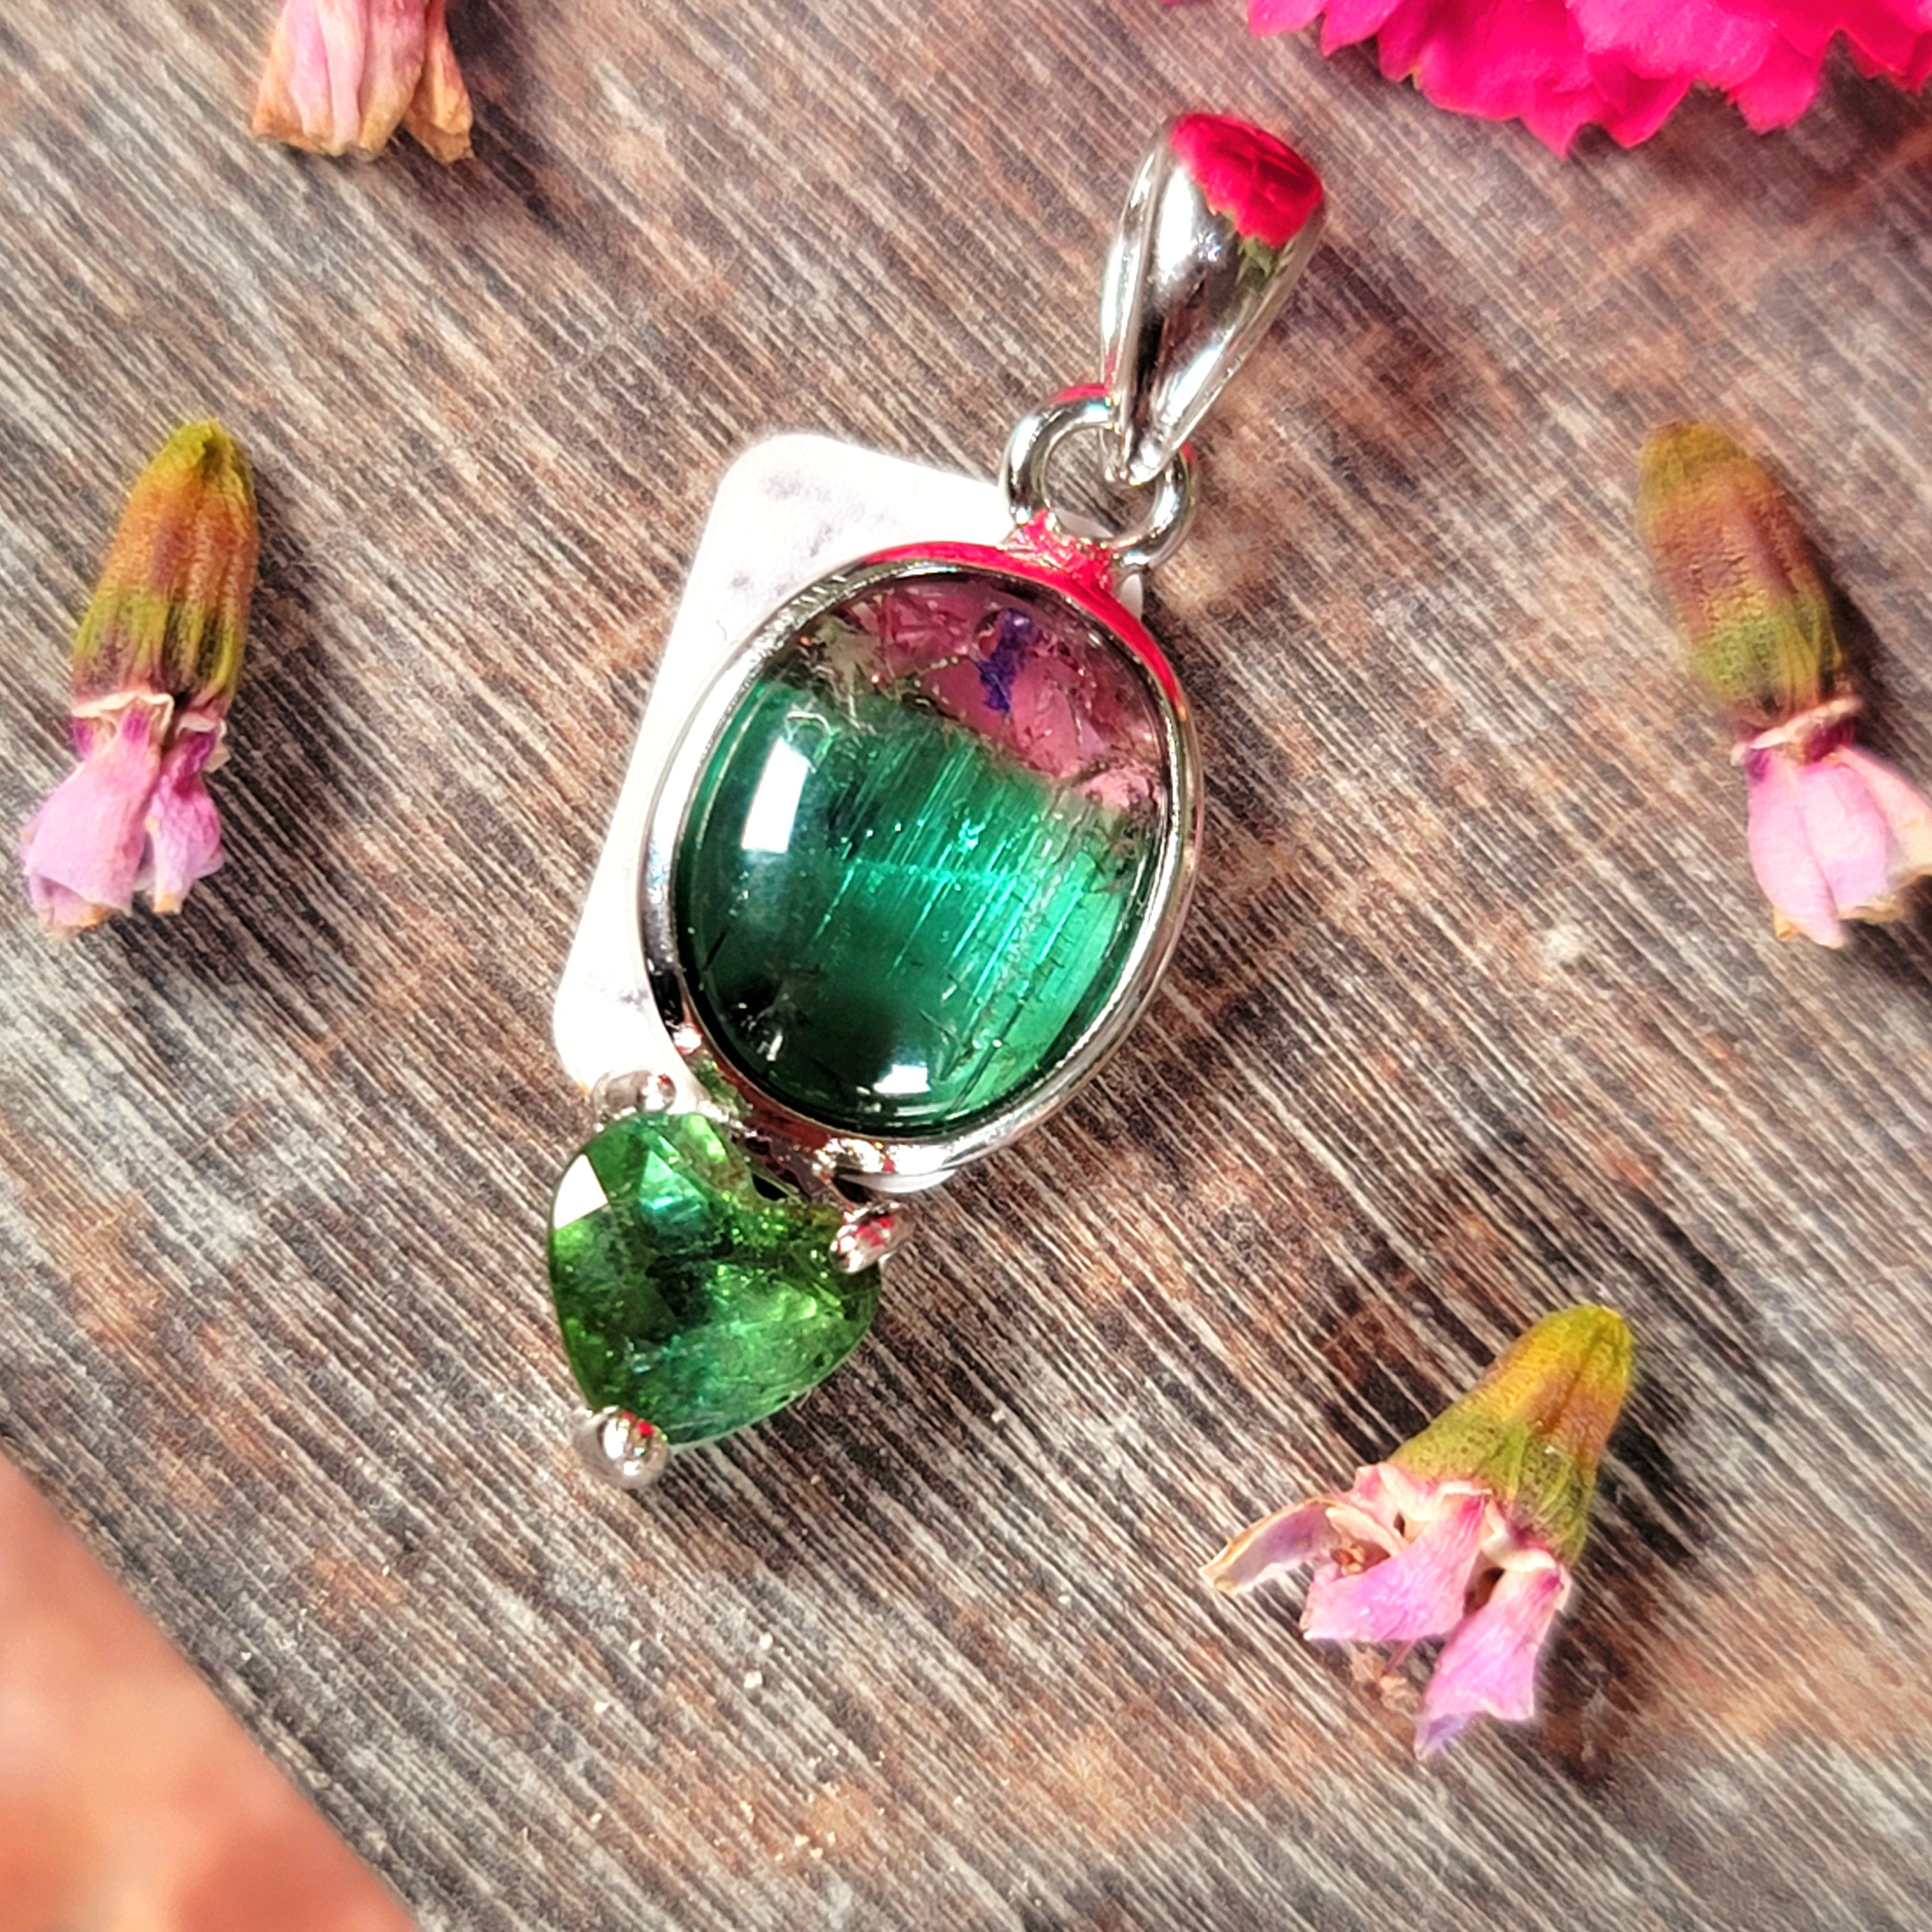 Watermelon & Green Tourmaline Heart Pendant .925 Silver for Removing Insecurities and Helping Inspire Creativity